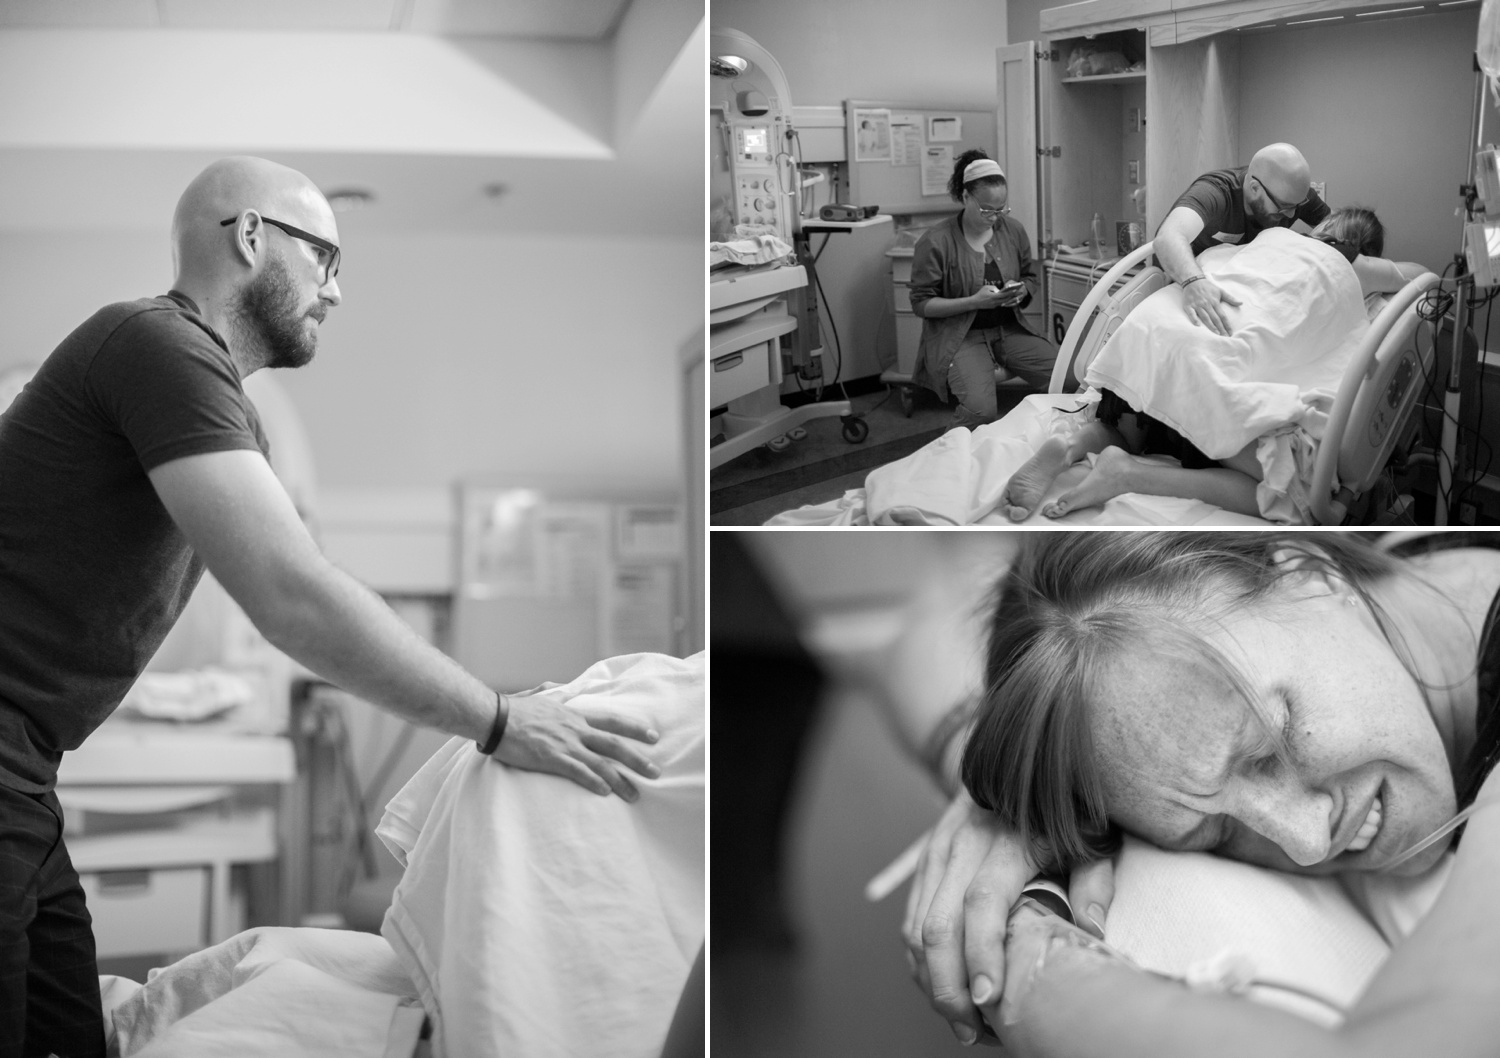  Baby Langhoff is born on April 25, 2016 at 1:40am in Cary, NC. All photos (C) Courtney Potter Photography, Inc. 2016 for The Birth Collective. 